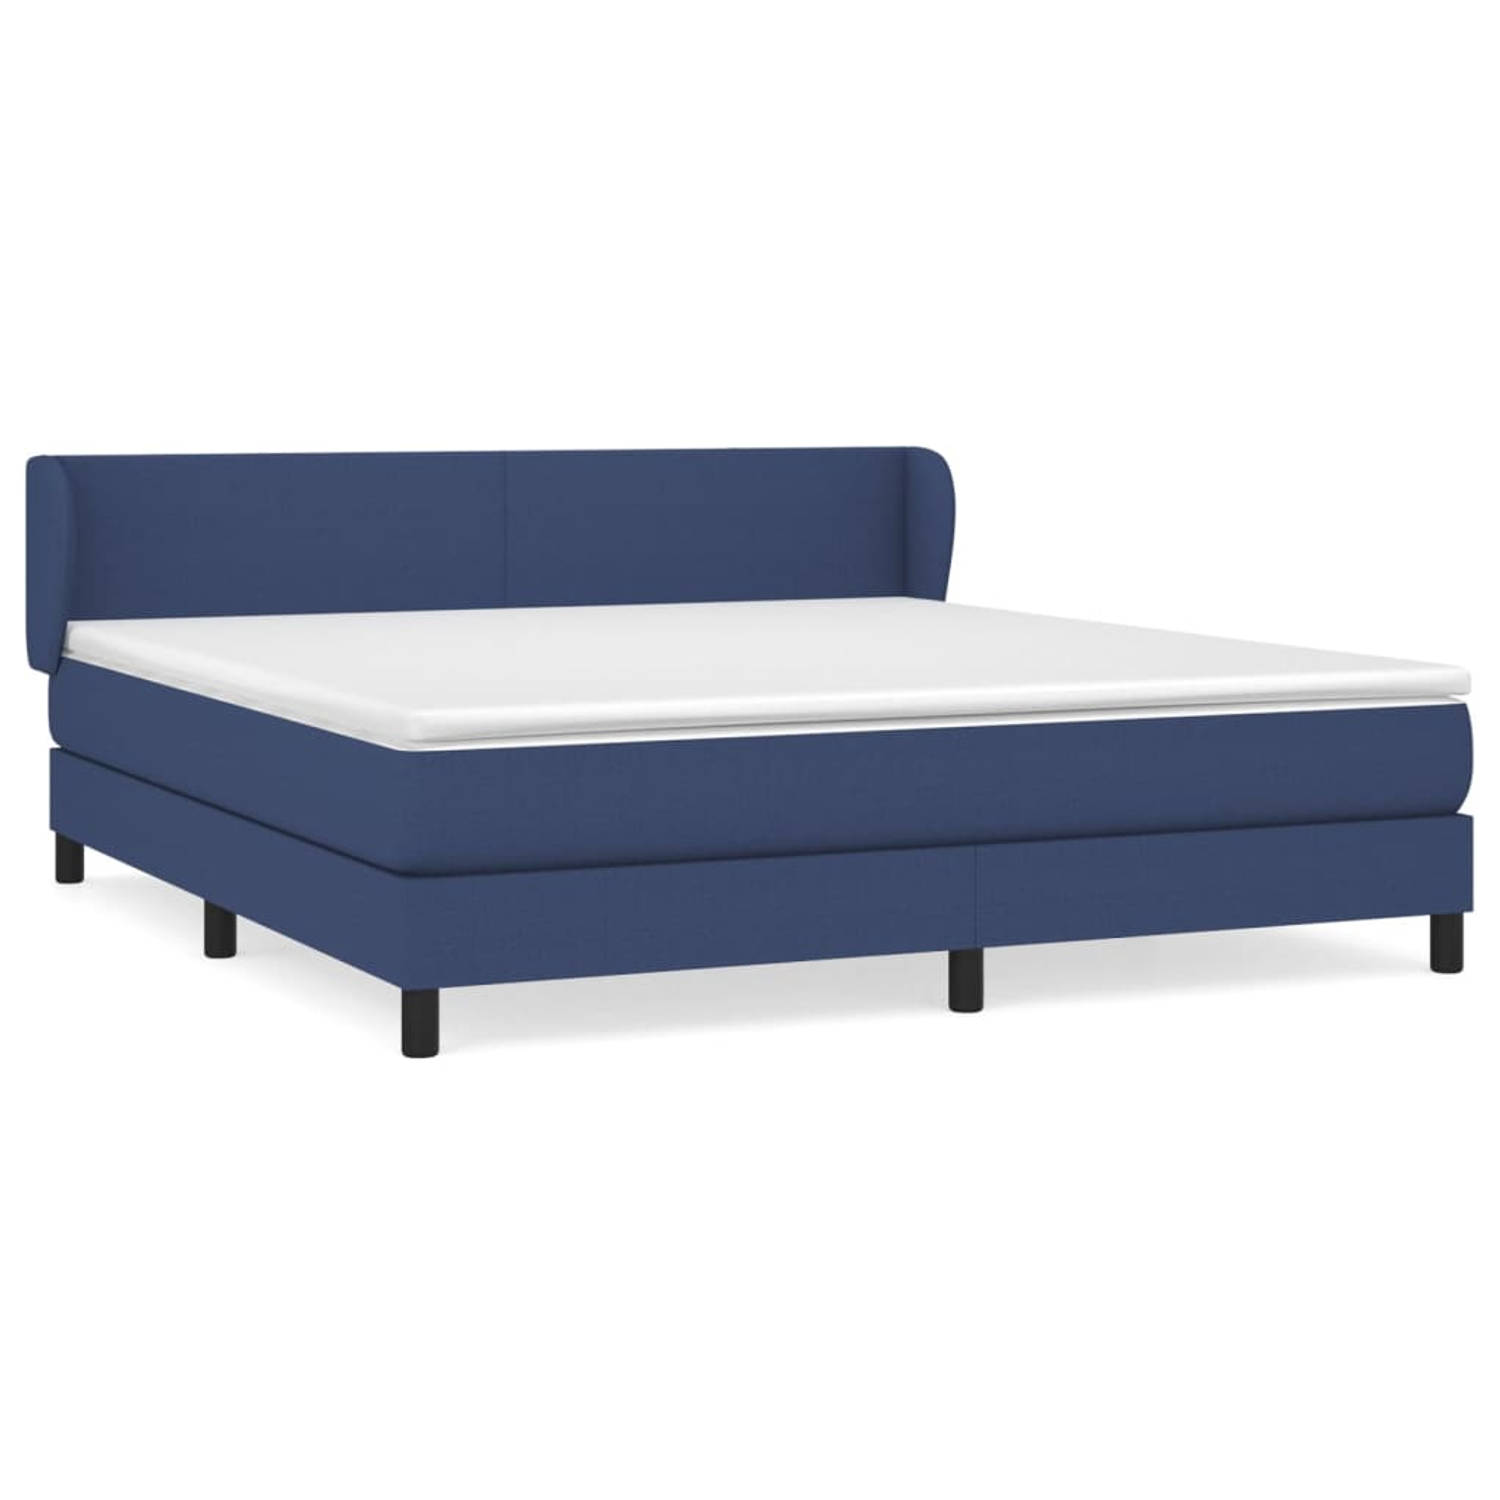 The Living Store Boxspringbed - Comfort - Bed - 203 x 183 x 78/88 cm - Blauw - Stof (100% polyester)